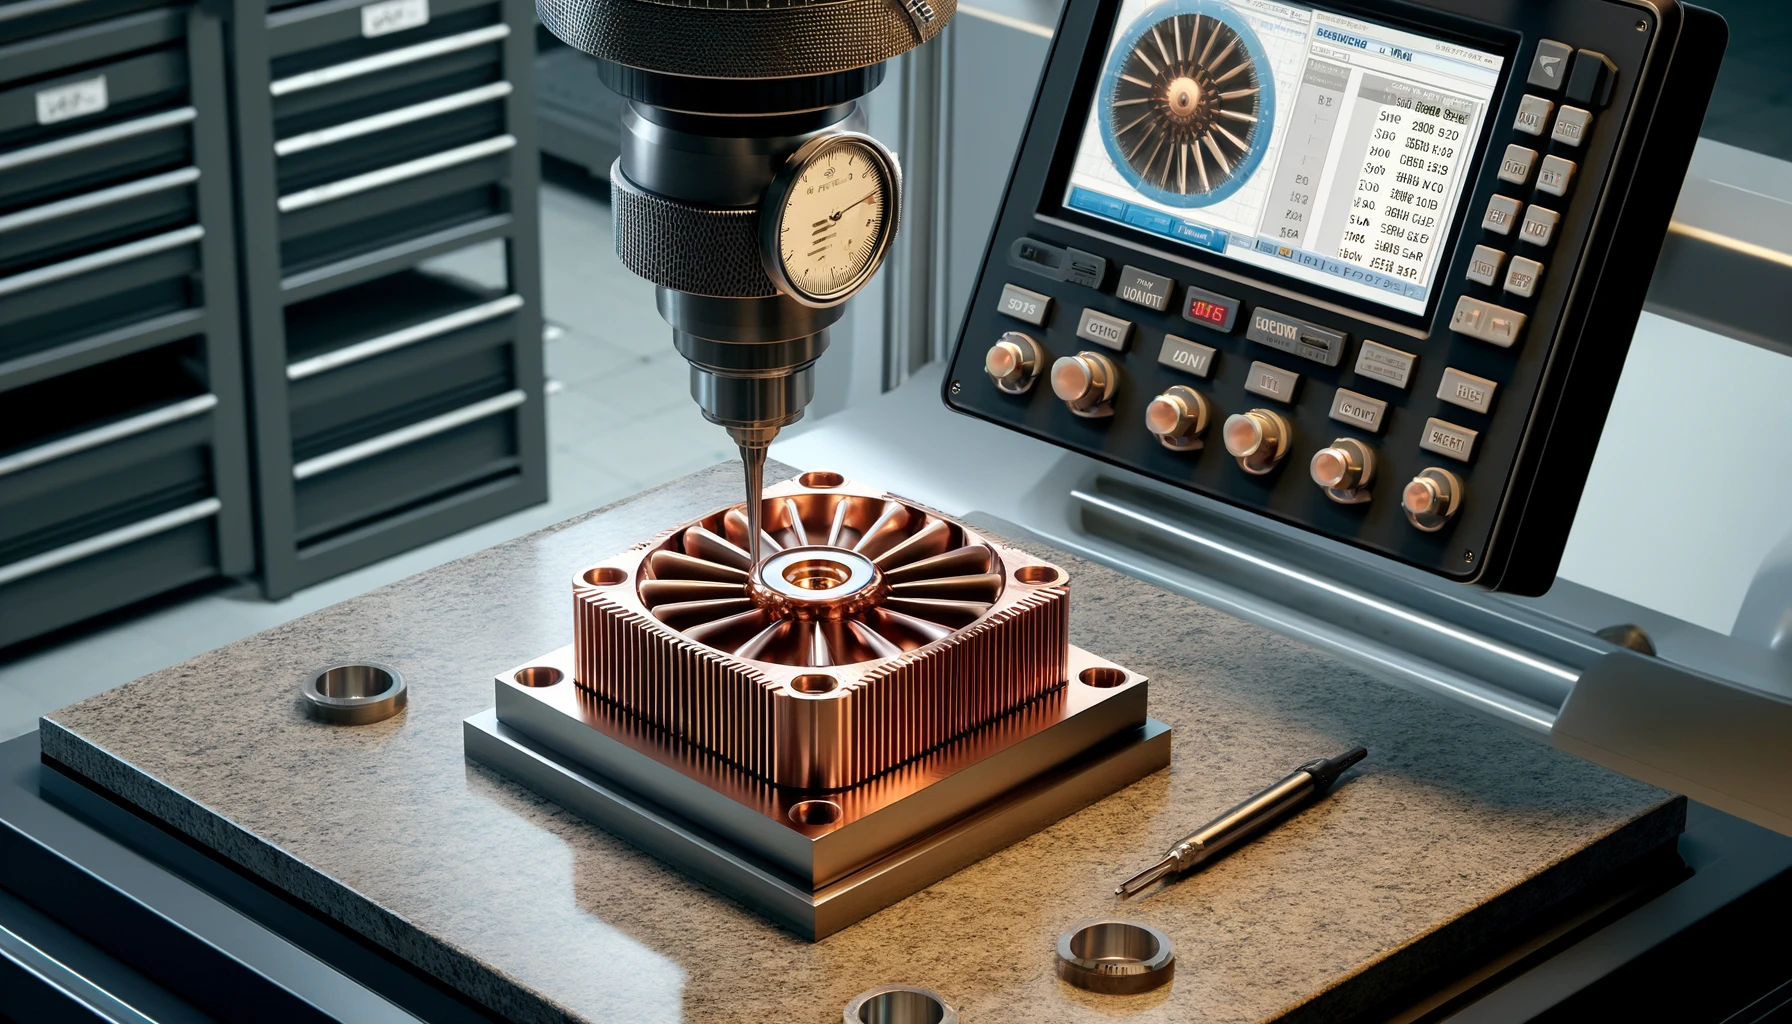 CMMs verify critical dimensions to ensure geometric accuracy